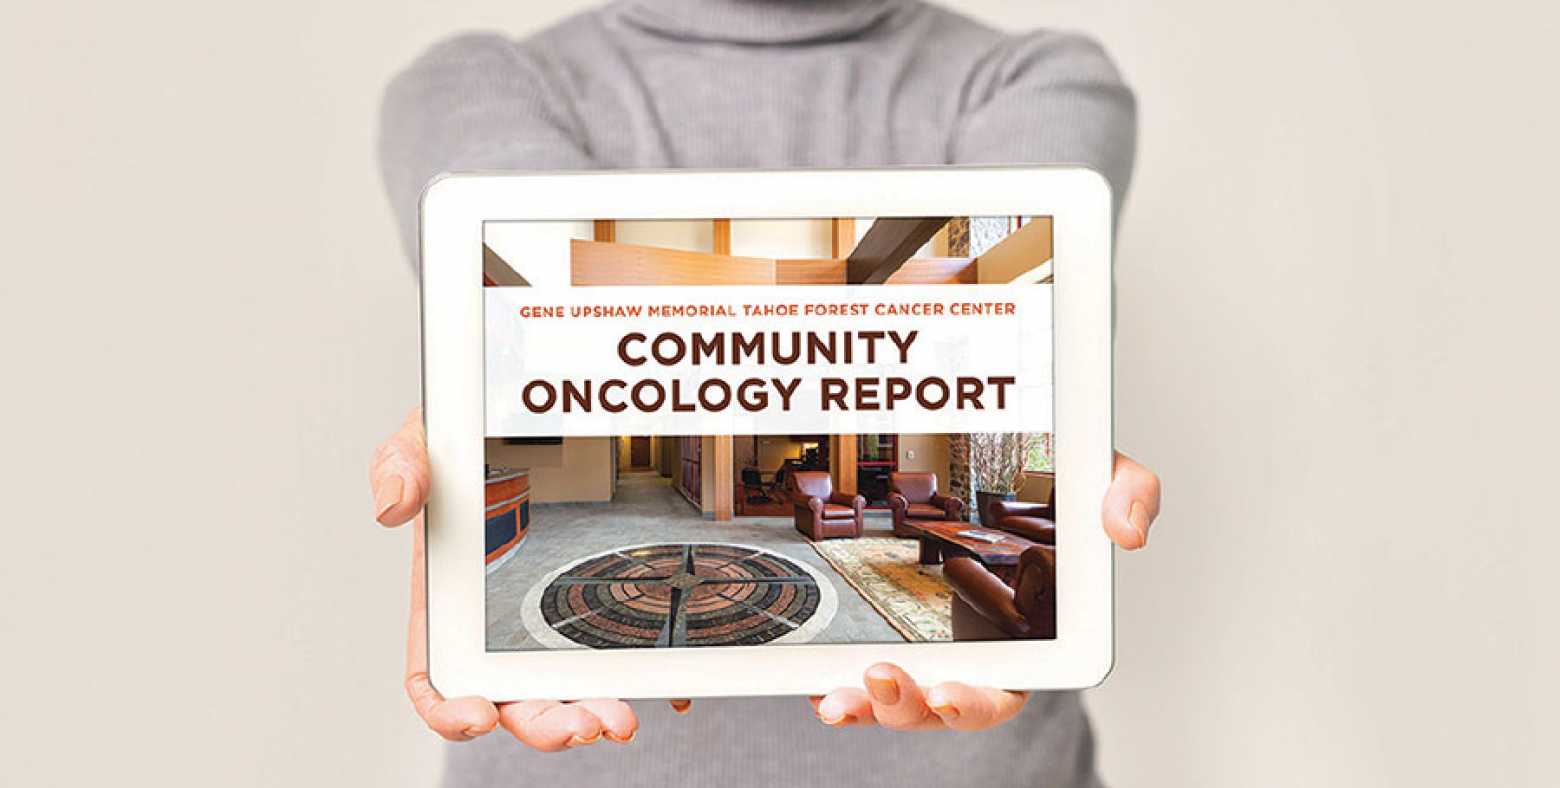 Woman holding an iPad with Community Oncology Report on the screen